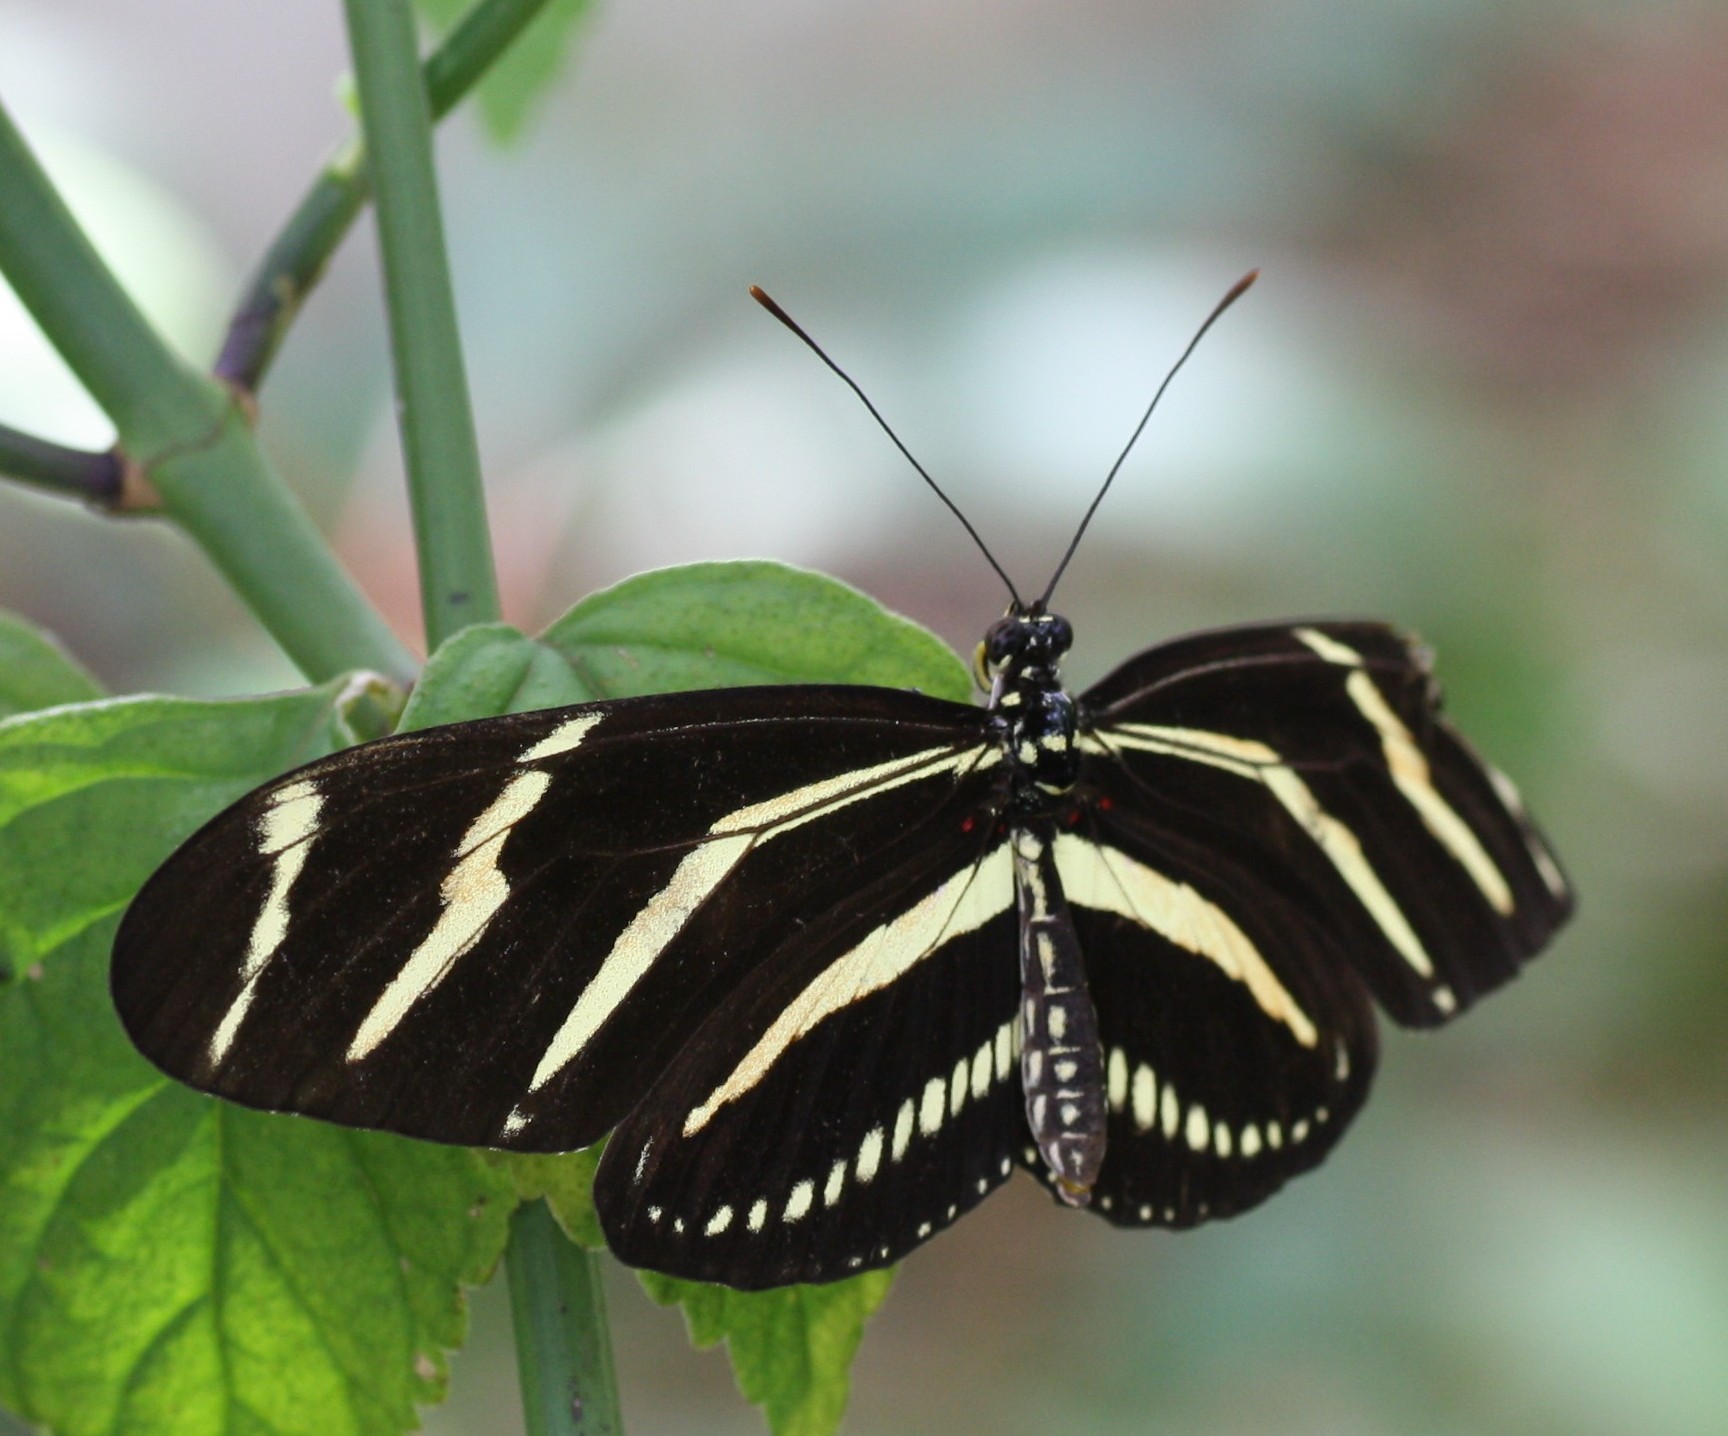 a black and white striped erfly resting on the leaves